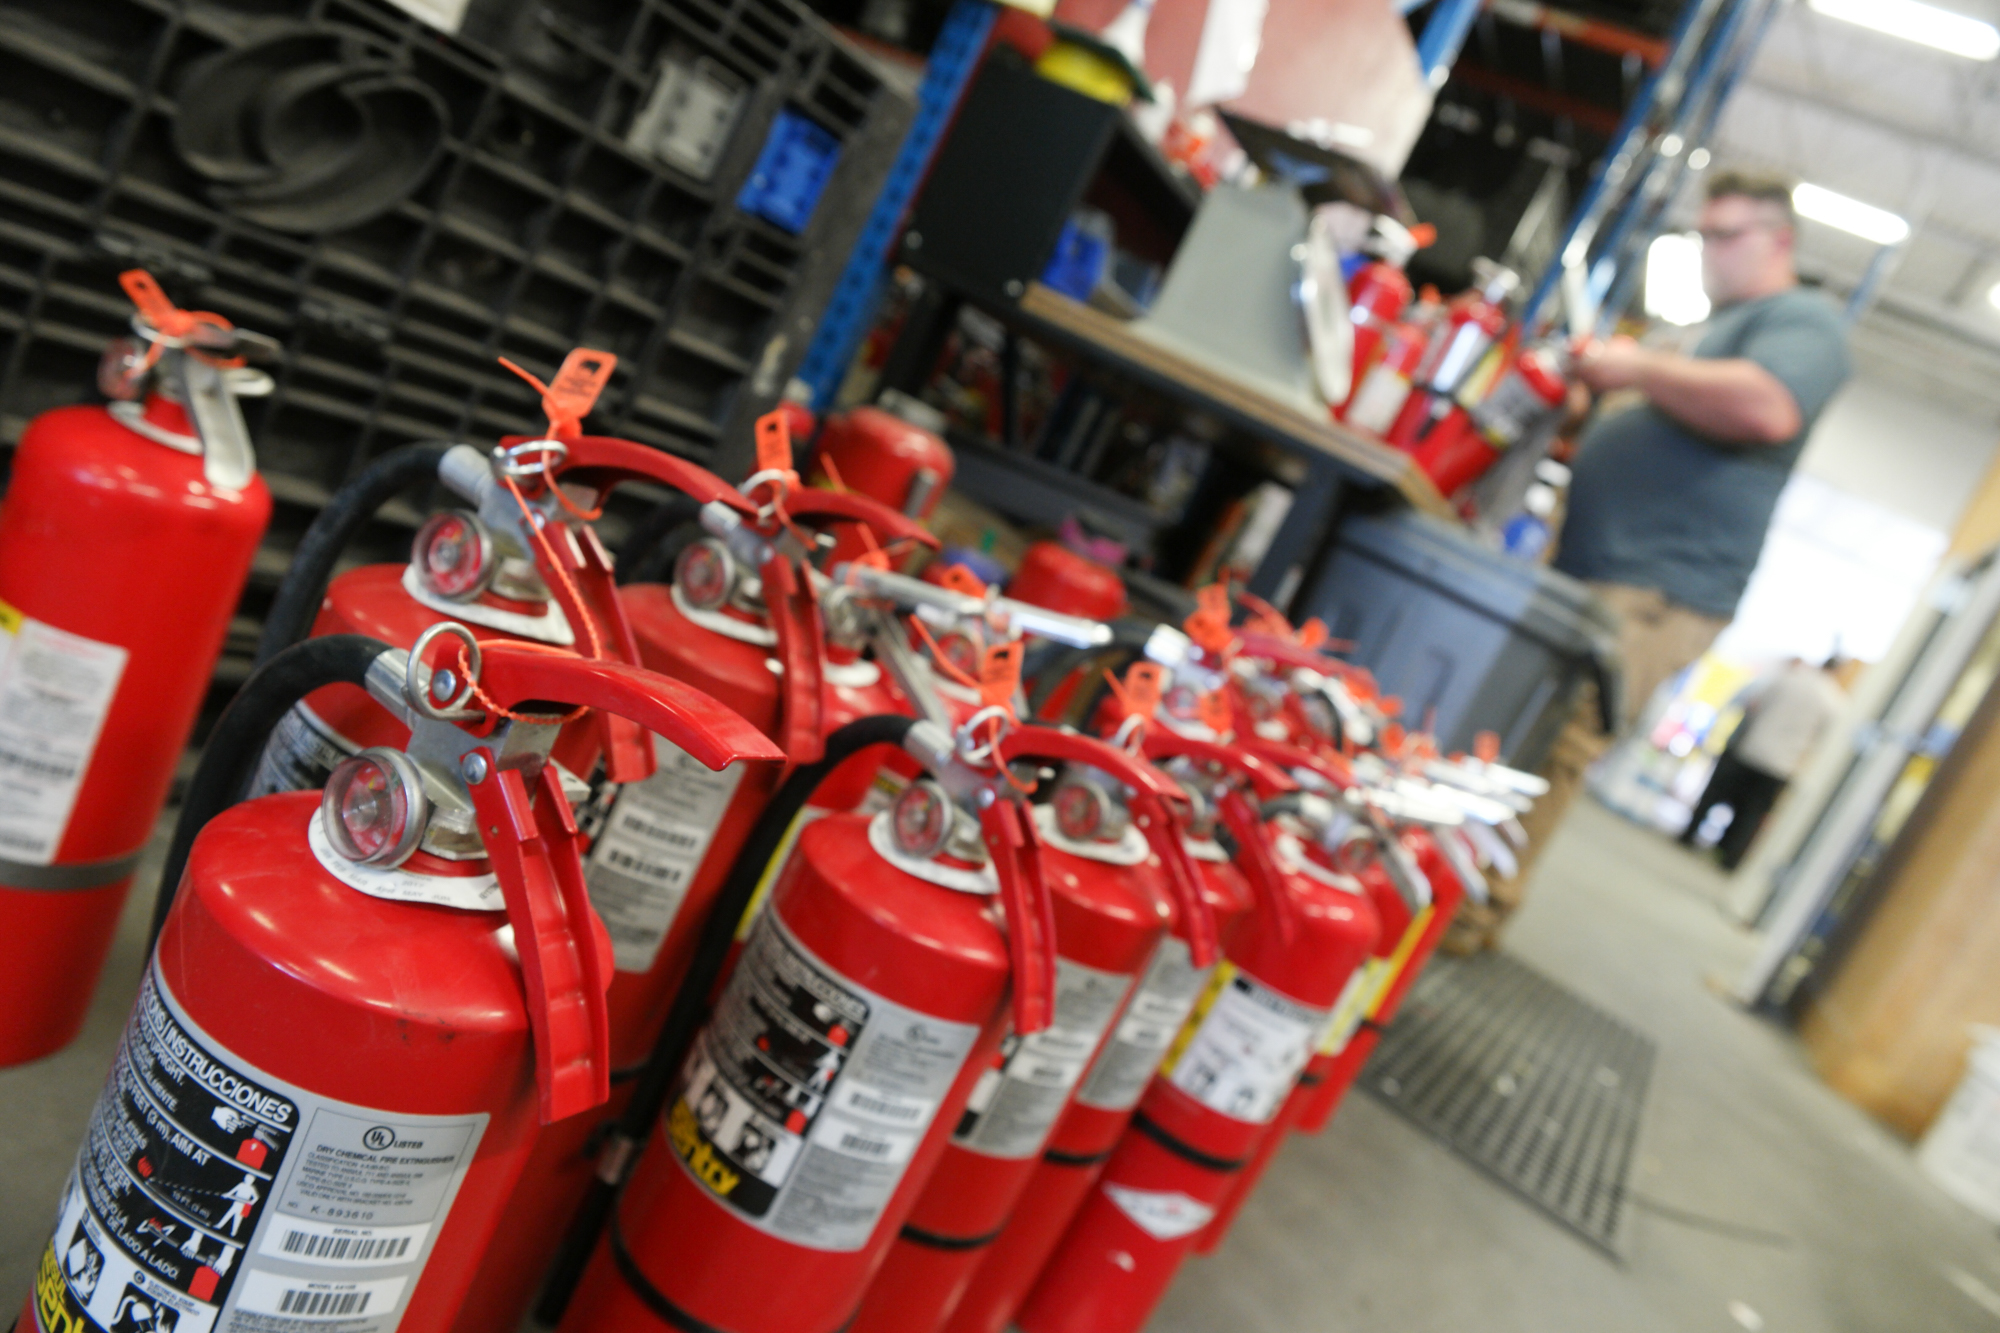 where to buy fire extinguisher near me